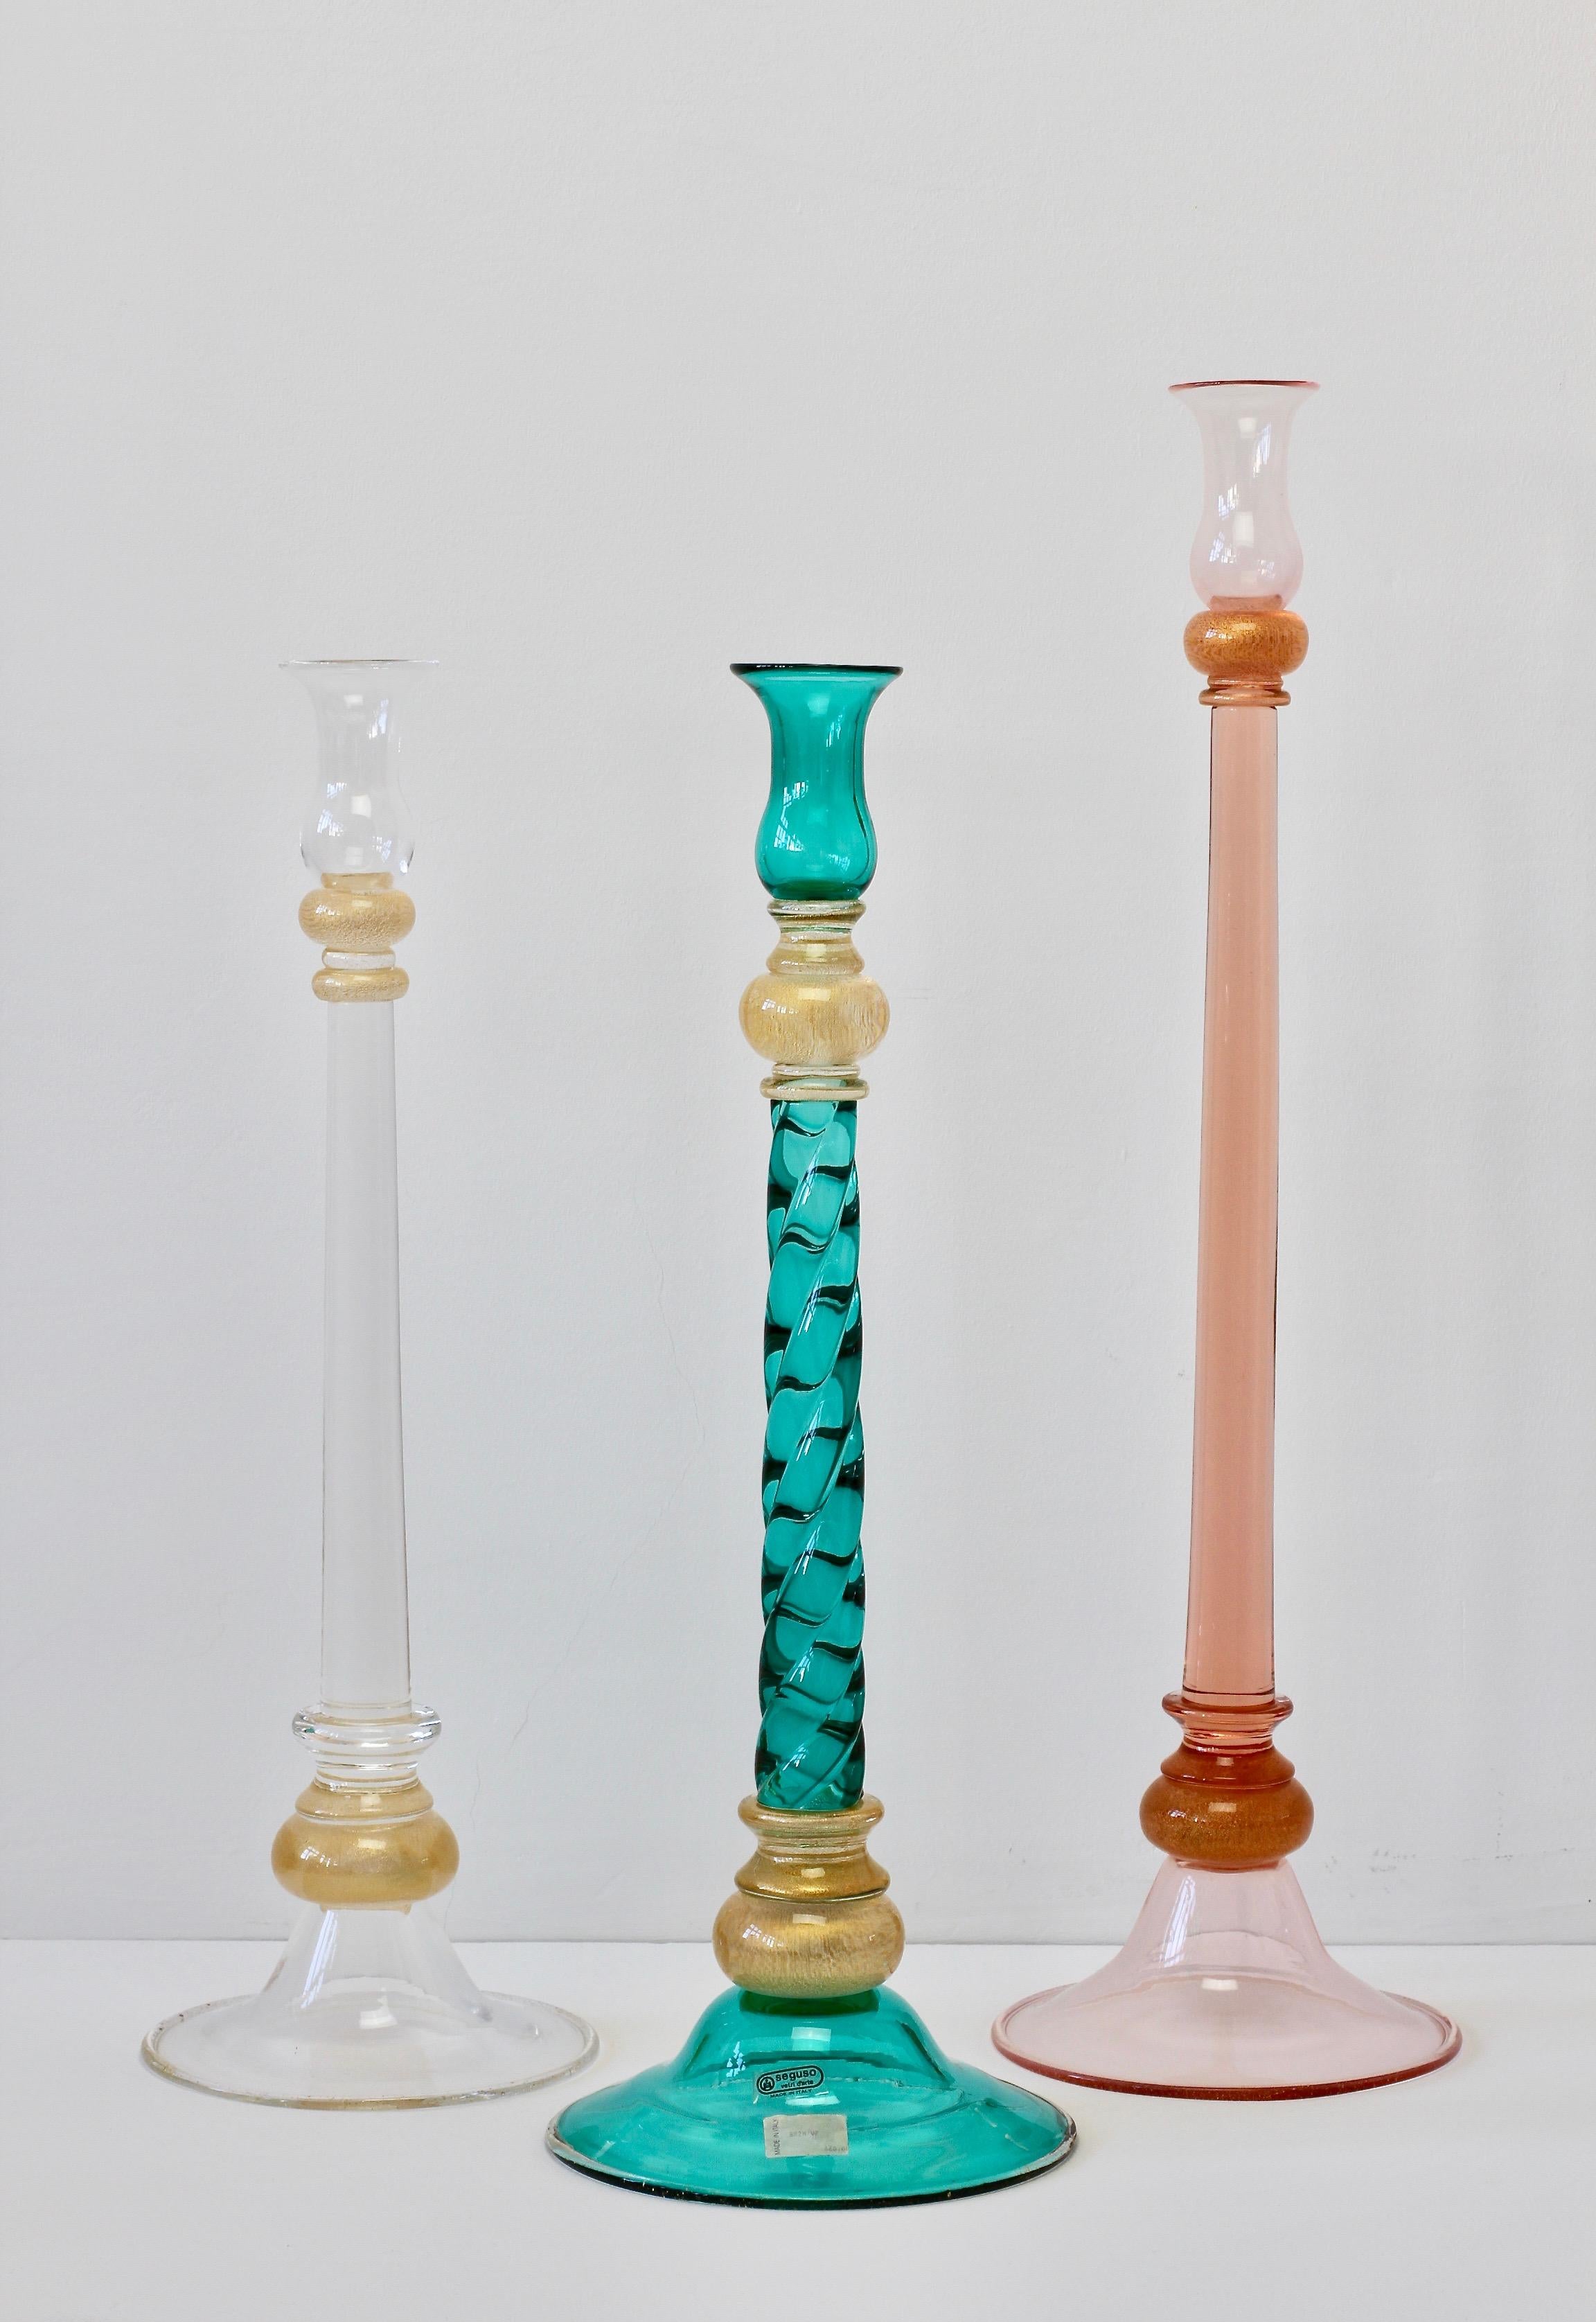 Monumental, tall and huge ensemble, group or set of colored (coloured) Italian Murano glass candlestick holders by Seguso Vetri D'Arte. Beautiful craftsmanship and stunning color - pink, green and clear glass all with gold dust fleck inclusions.